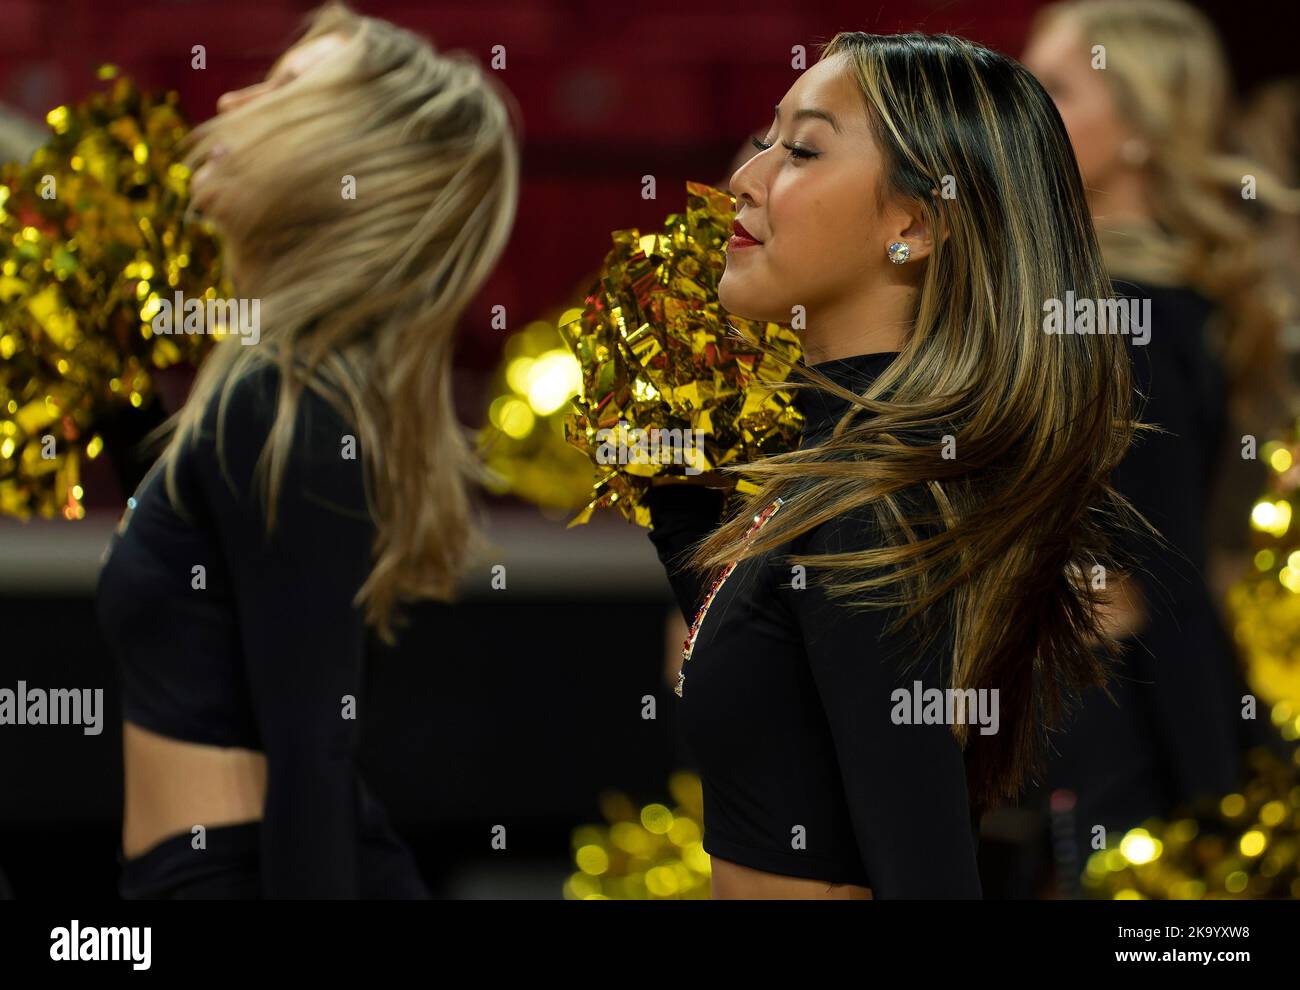 Cheerleader performs during a college basketball game Stock Photo